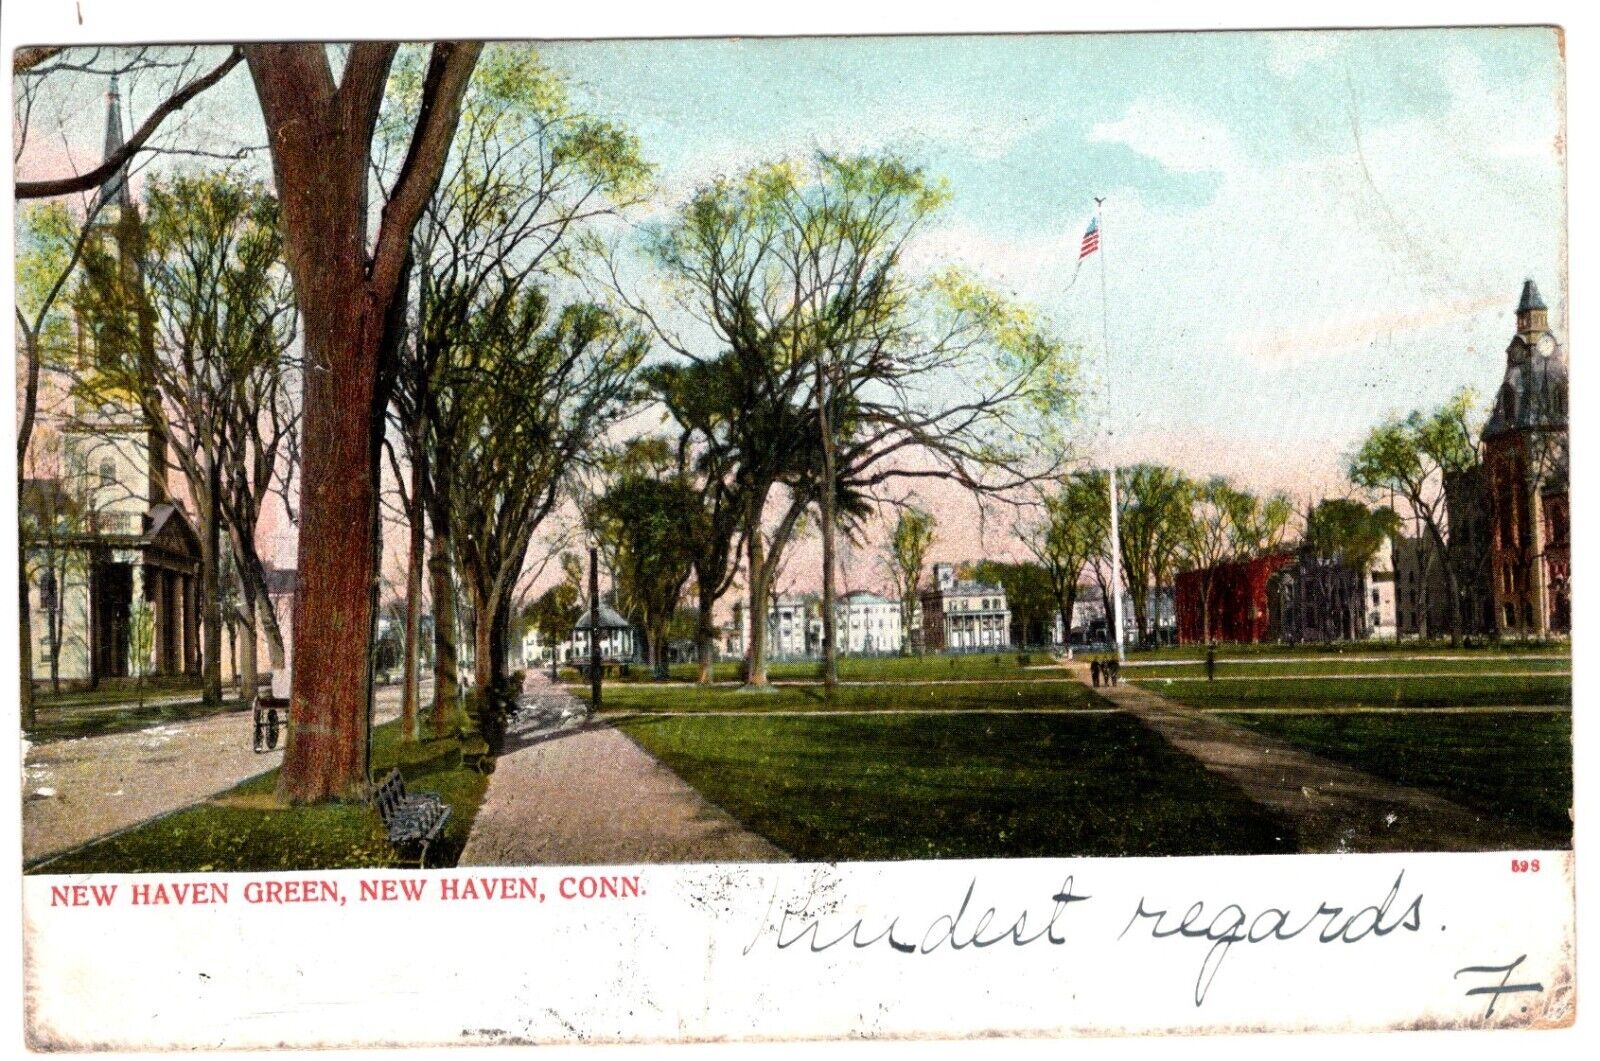 New Haven Green, New Haven, CONN. POST CARD.  Posted 1903